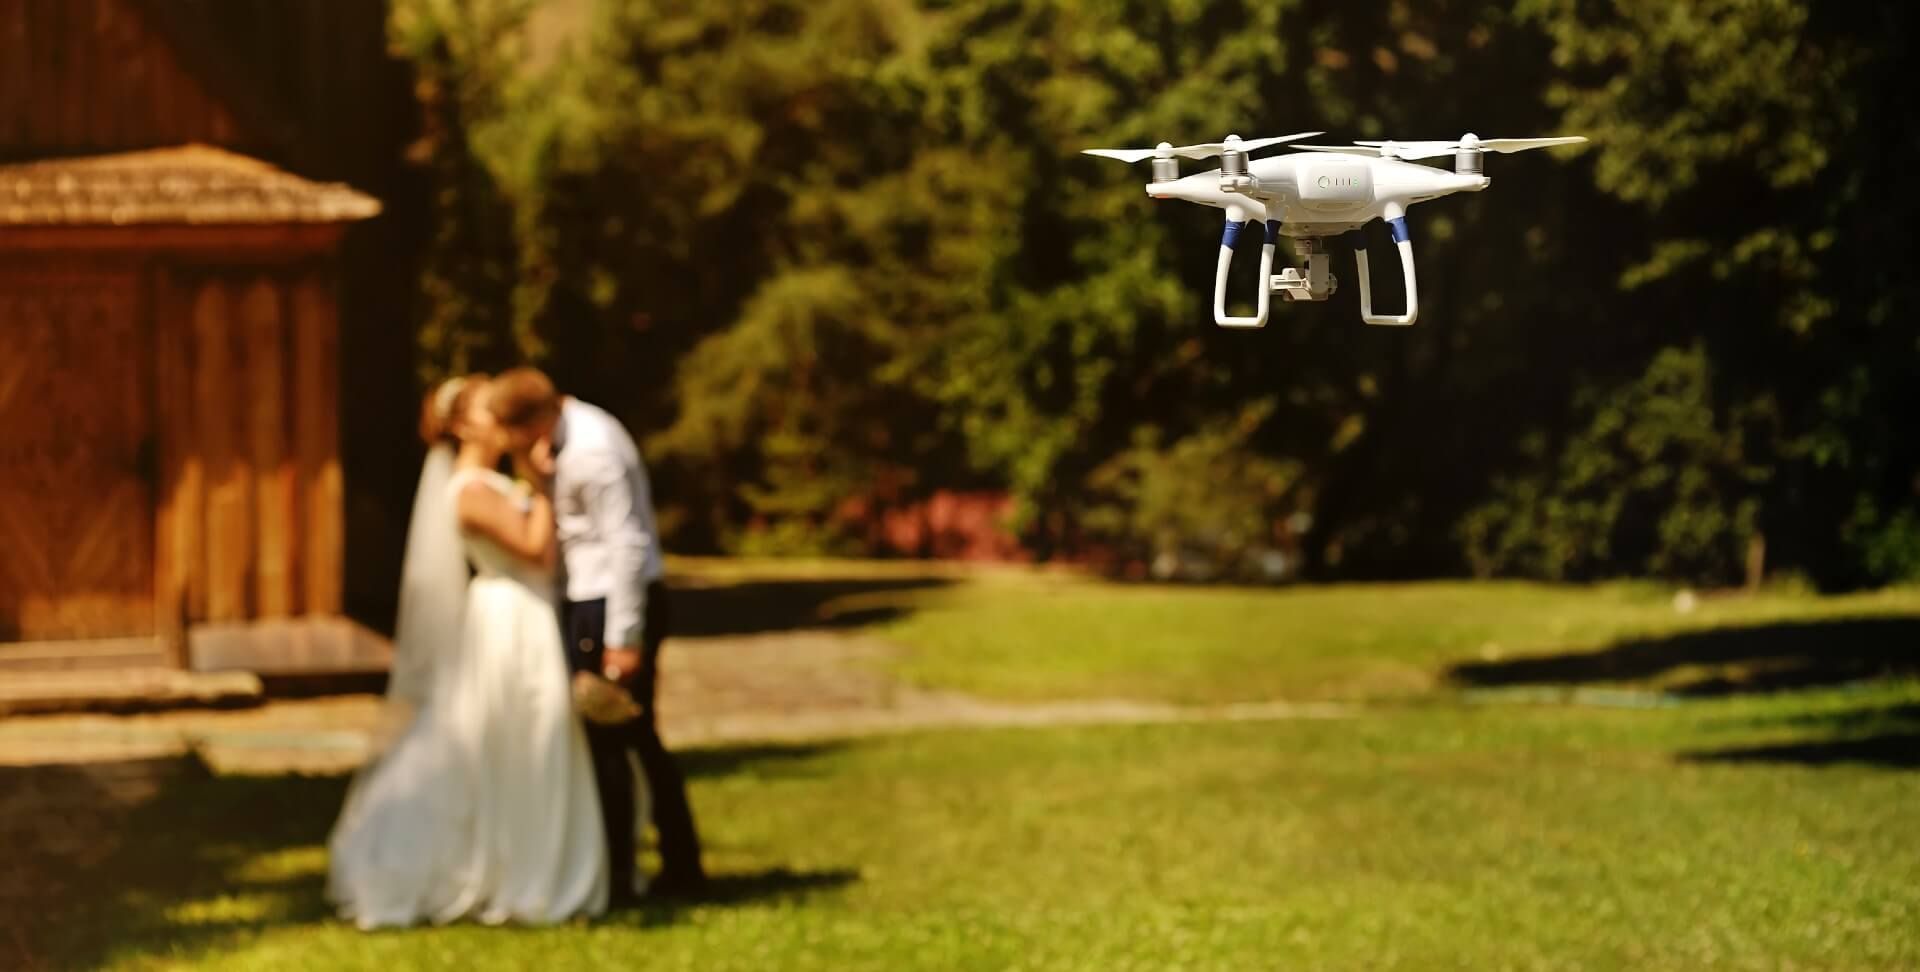 Bride and groom utilizing technology in their wedding by using drone